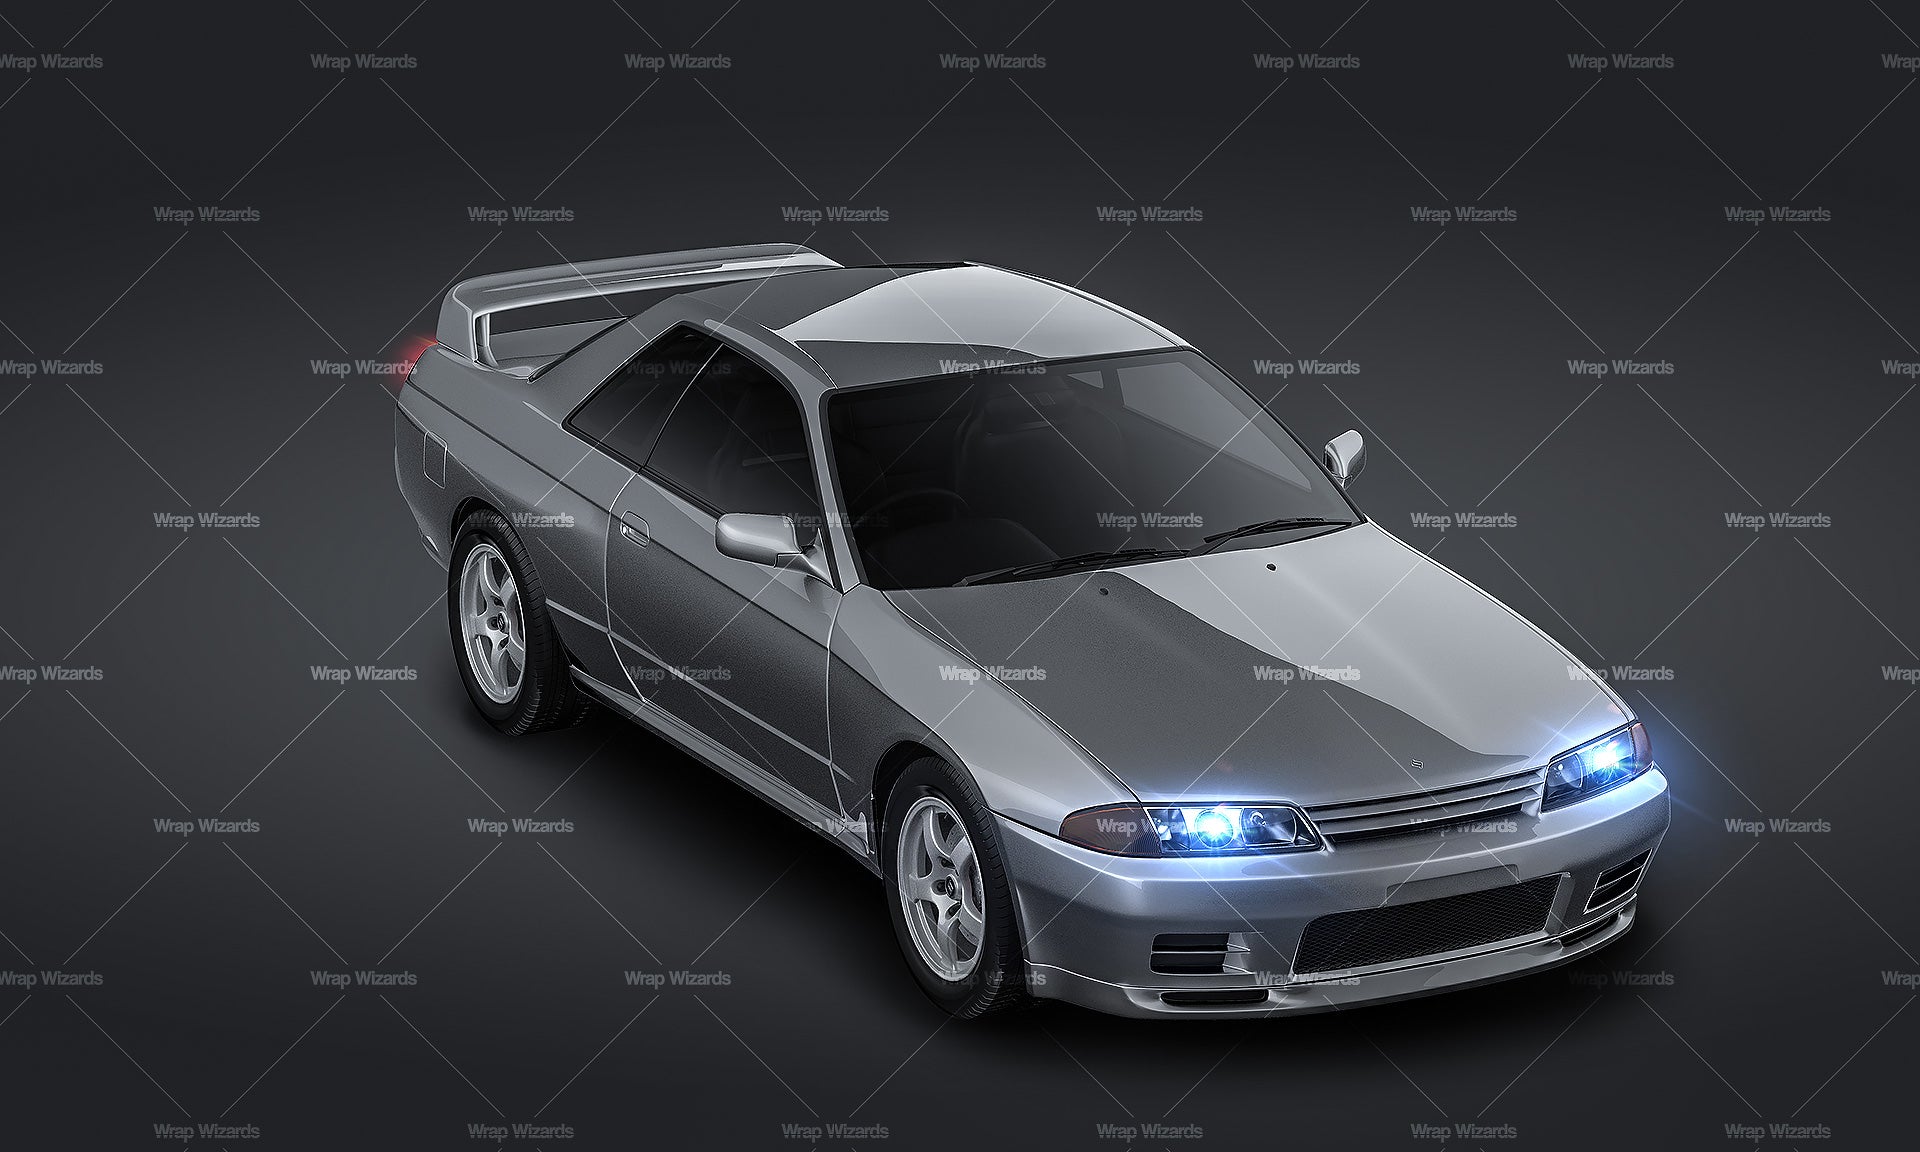 3/4 VIEW - Nissan Skyline R32 GT-R coupe 1989 glossy finish - Car Mockup Template.psd